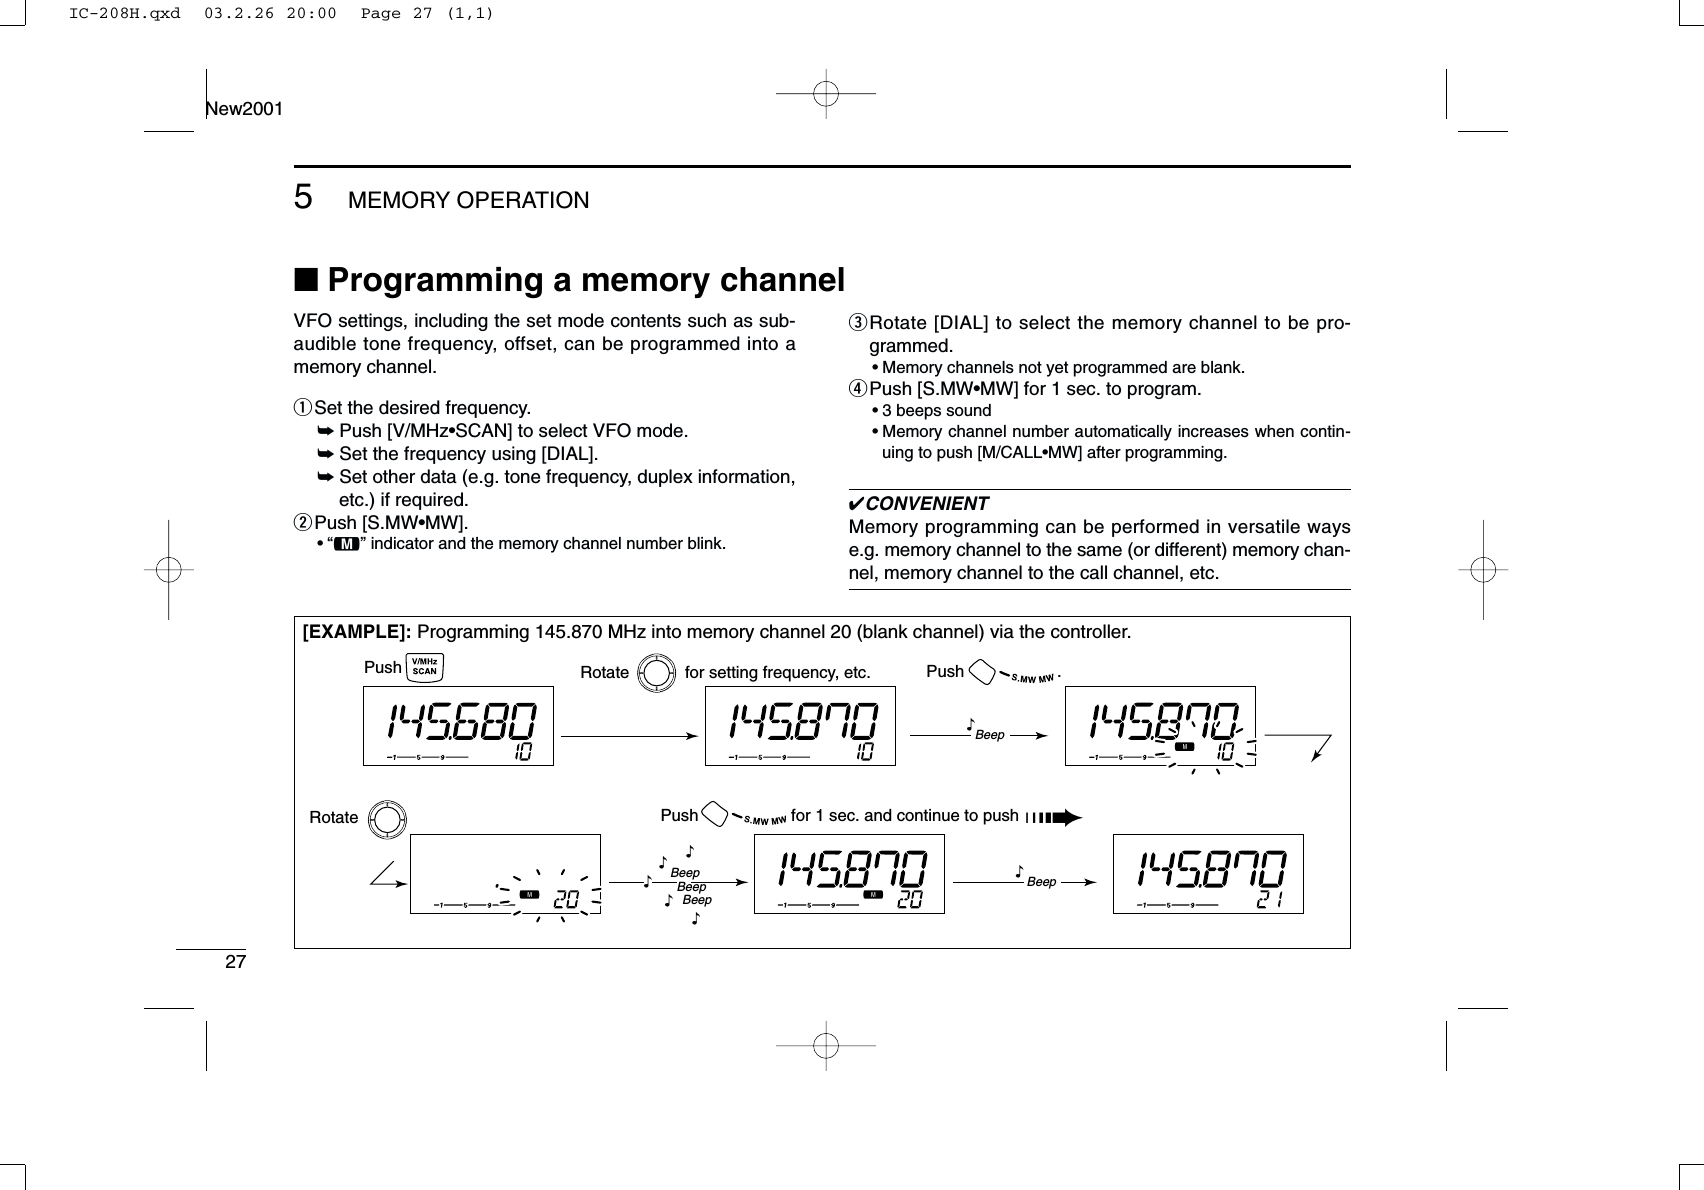 275MEMORY OPERATIONNew2001■Programming a memory channel[EXAMPLE]: Programming 145.870 MHz into memory channel 20 (blank channel) via the controller.Push Rotate            for setting frequency, etc. Push                    .Rotate Push                    for 1 sec. and continue to push ➠Beep“BeepBeepBeep“““““Beep“VFO settings, including the set mode contents such as sub-audible tone frequency, offset, can be programmed into amemory channel.qSet the desired frequency. ➥Push [V/MHz•SCAN] to select VFO mode.➥Set the frequency using [DIAL].➥Set other data (e.g. tone frequency, duplex information,etc.) if required.wPush [S.MW•MW].•“!” indicator and the memory channel number blink.eRotate [DIAL] to select the memory channel to be pro-grammed.•Memory channels not yet programmed are blank.rPush [S.MW•MW] for 1 sec. to program.•3 beeps sound•Memory channel number automatically increases when contin-uing to push [M/CALL•MW] after programming.✔CONVENIENTMemory programming can be performed in versatile wayse.g. memory channel to the same (or different) memory chan-nel, memory channel to the call channel, etc.IC-208H.qxd  03.2.26 20:00  Page 27 (1,1)